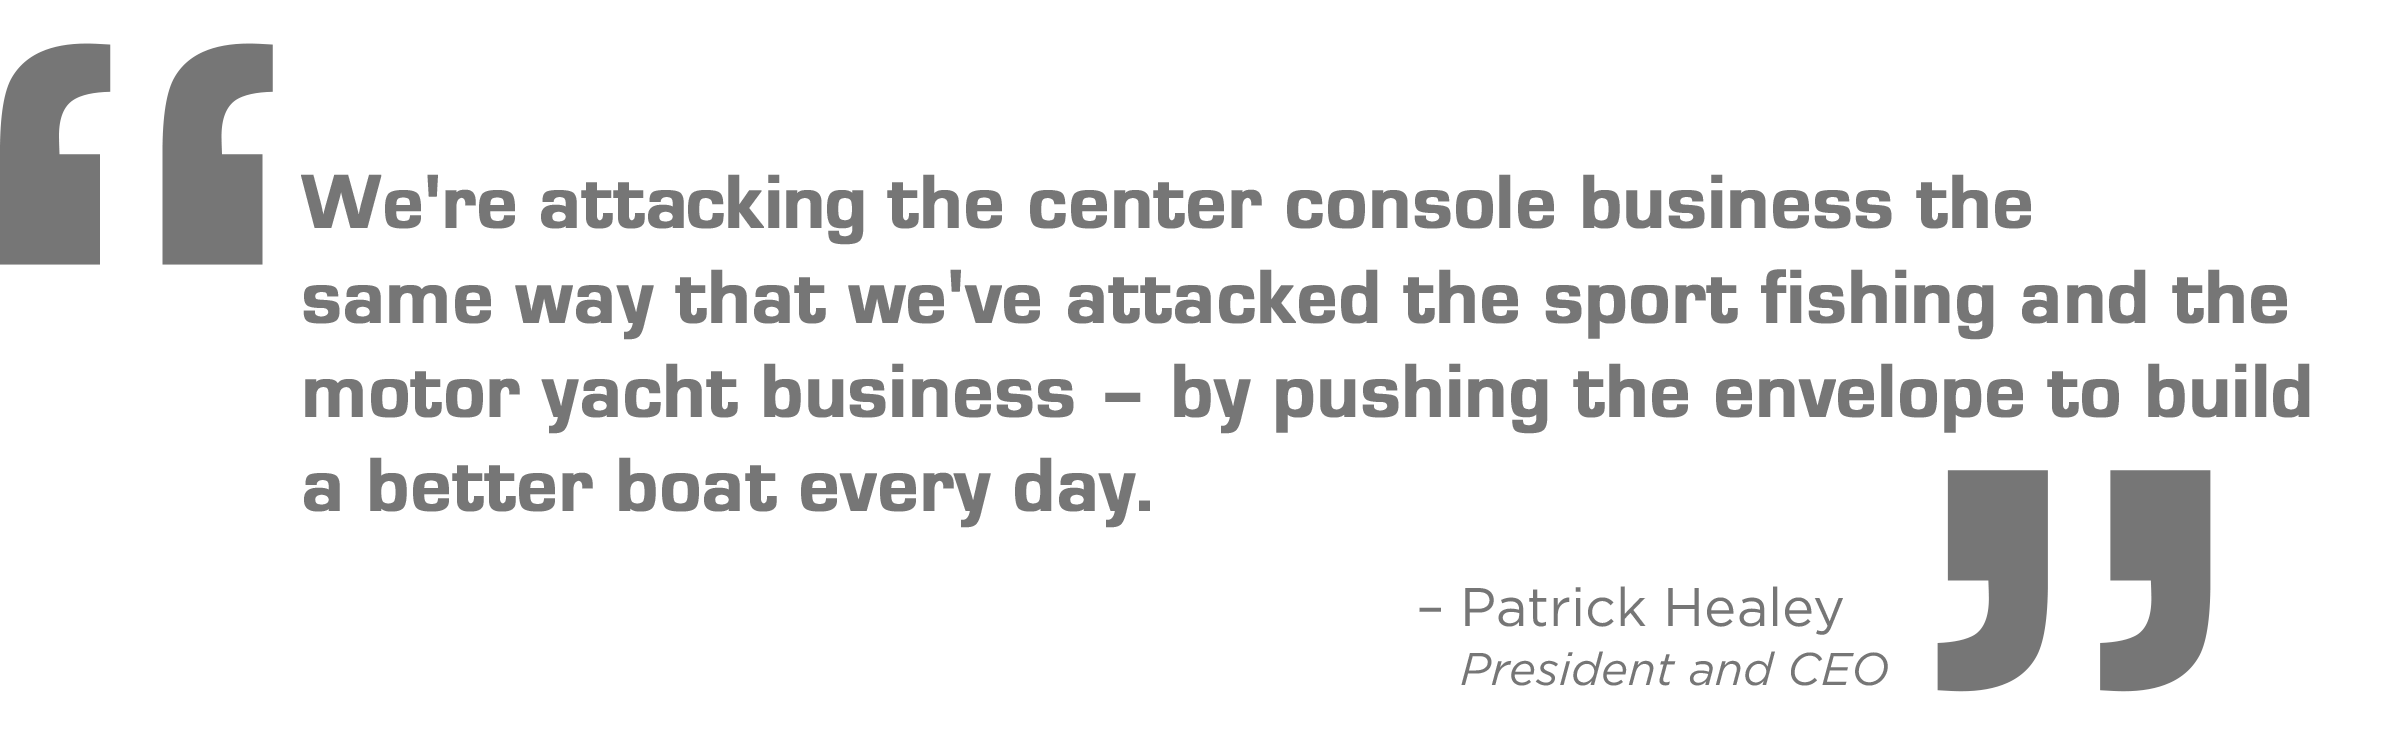 We're attacking the center console business the same way that we've attacked the sport fishing and the motor yacht business - by pushing the envelope to build a better boat every day. - Patrick Healey, President and CEO